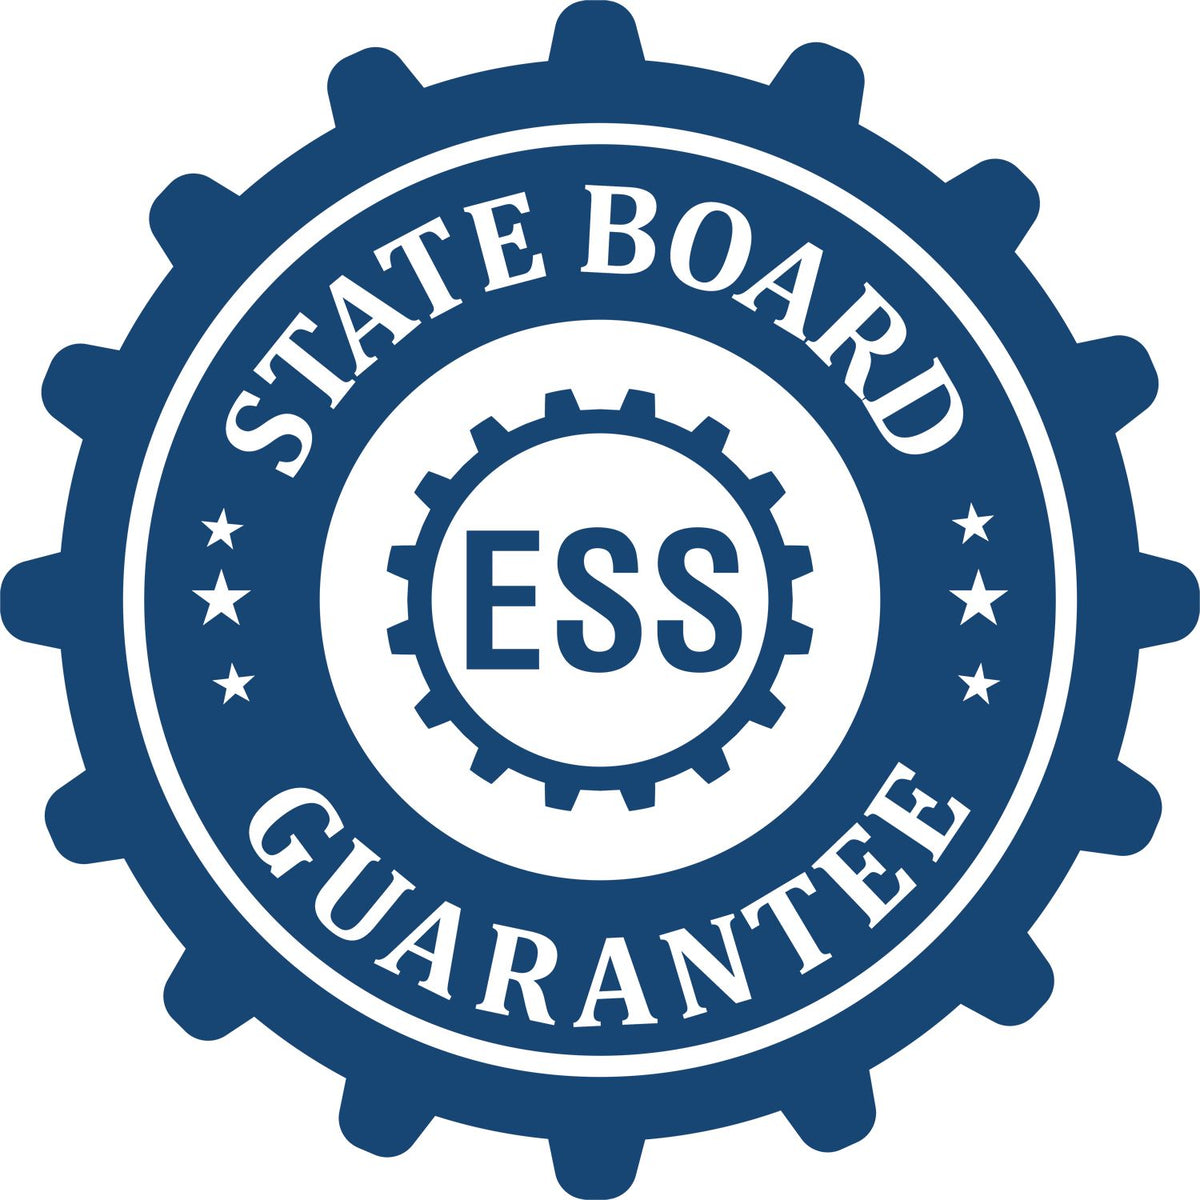 An emblem in a gear shape illustrating a state board guarantee for the Gift Delaware Landscape Architect Seal